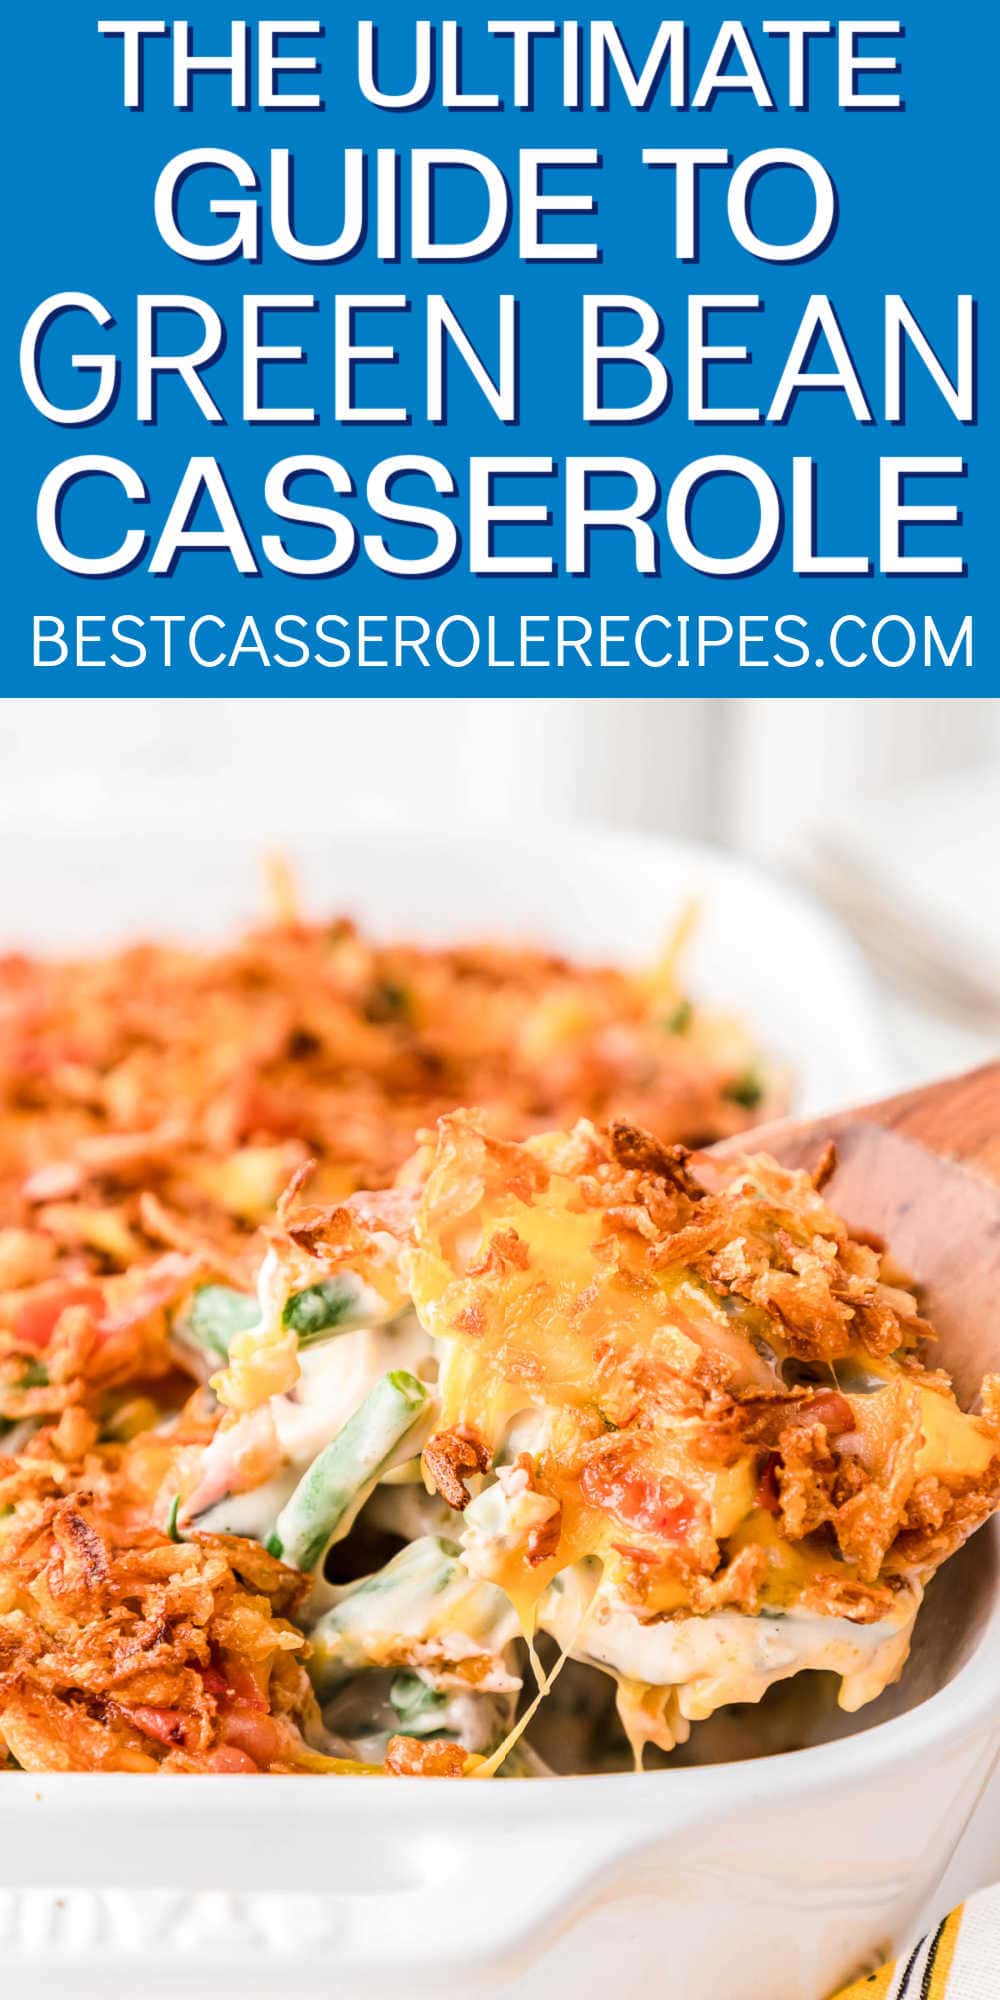 wood spoon scooping out green bean casserole with a blue banner and text